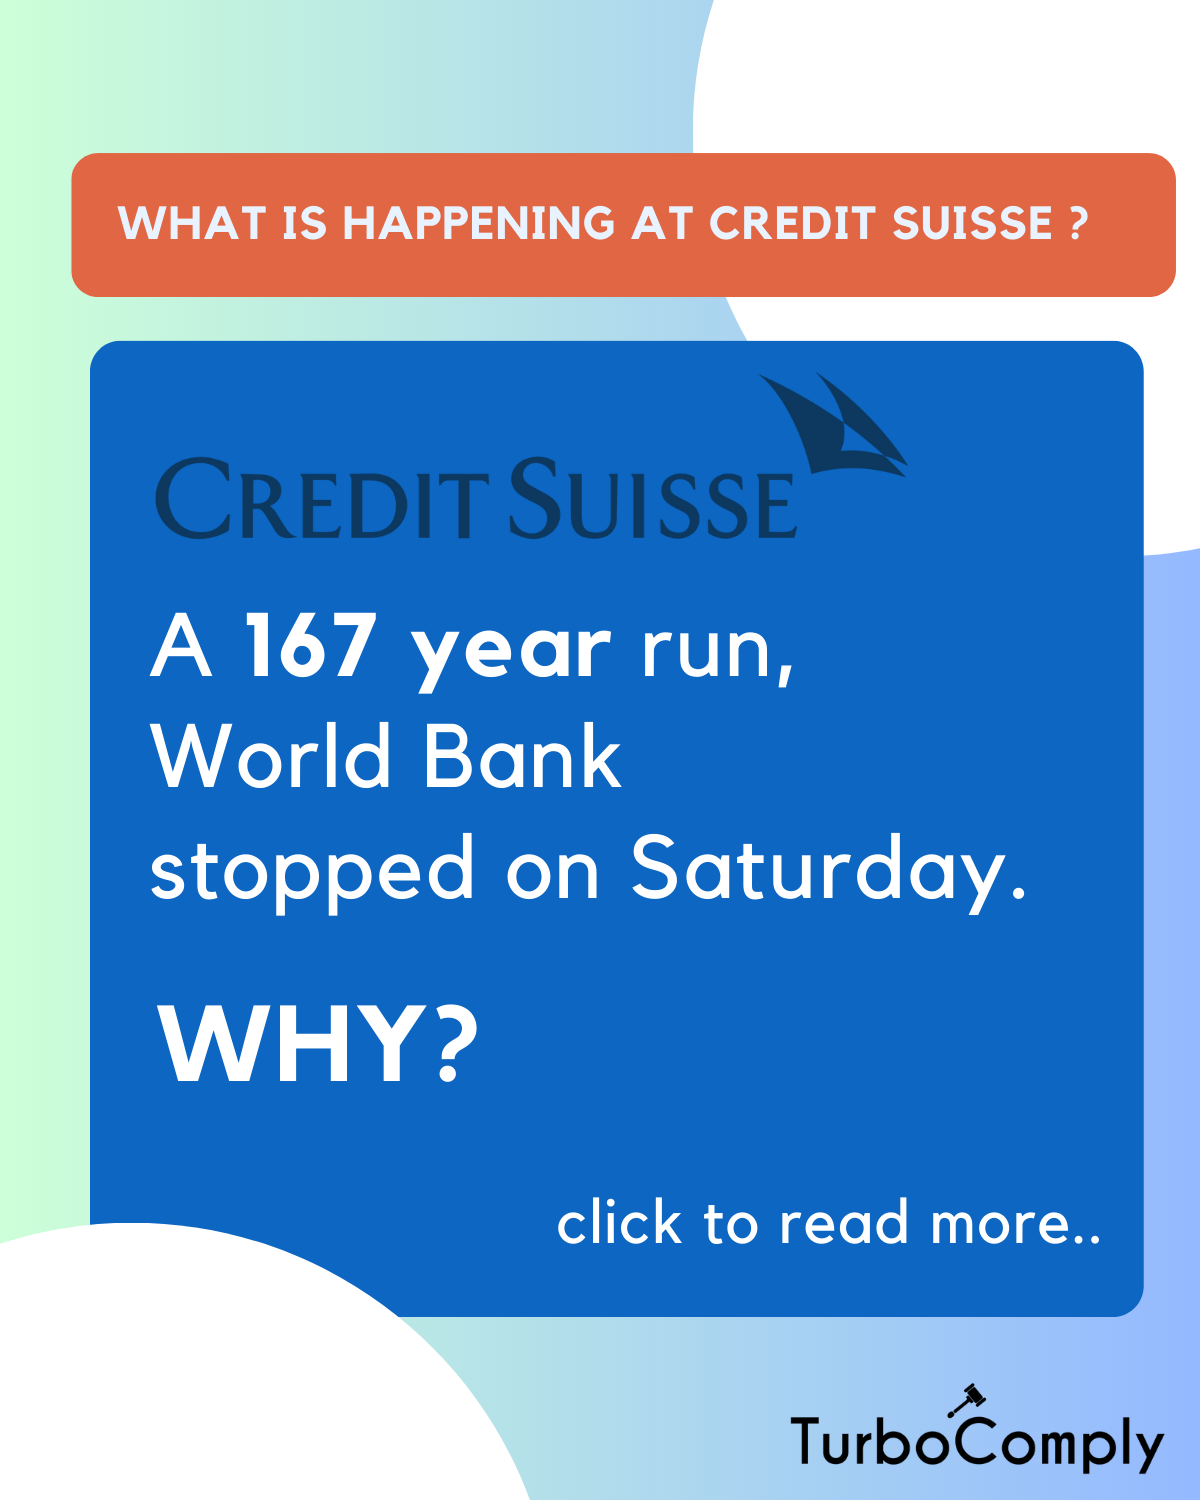 What is happening at Credit Suisse Bank?